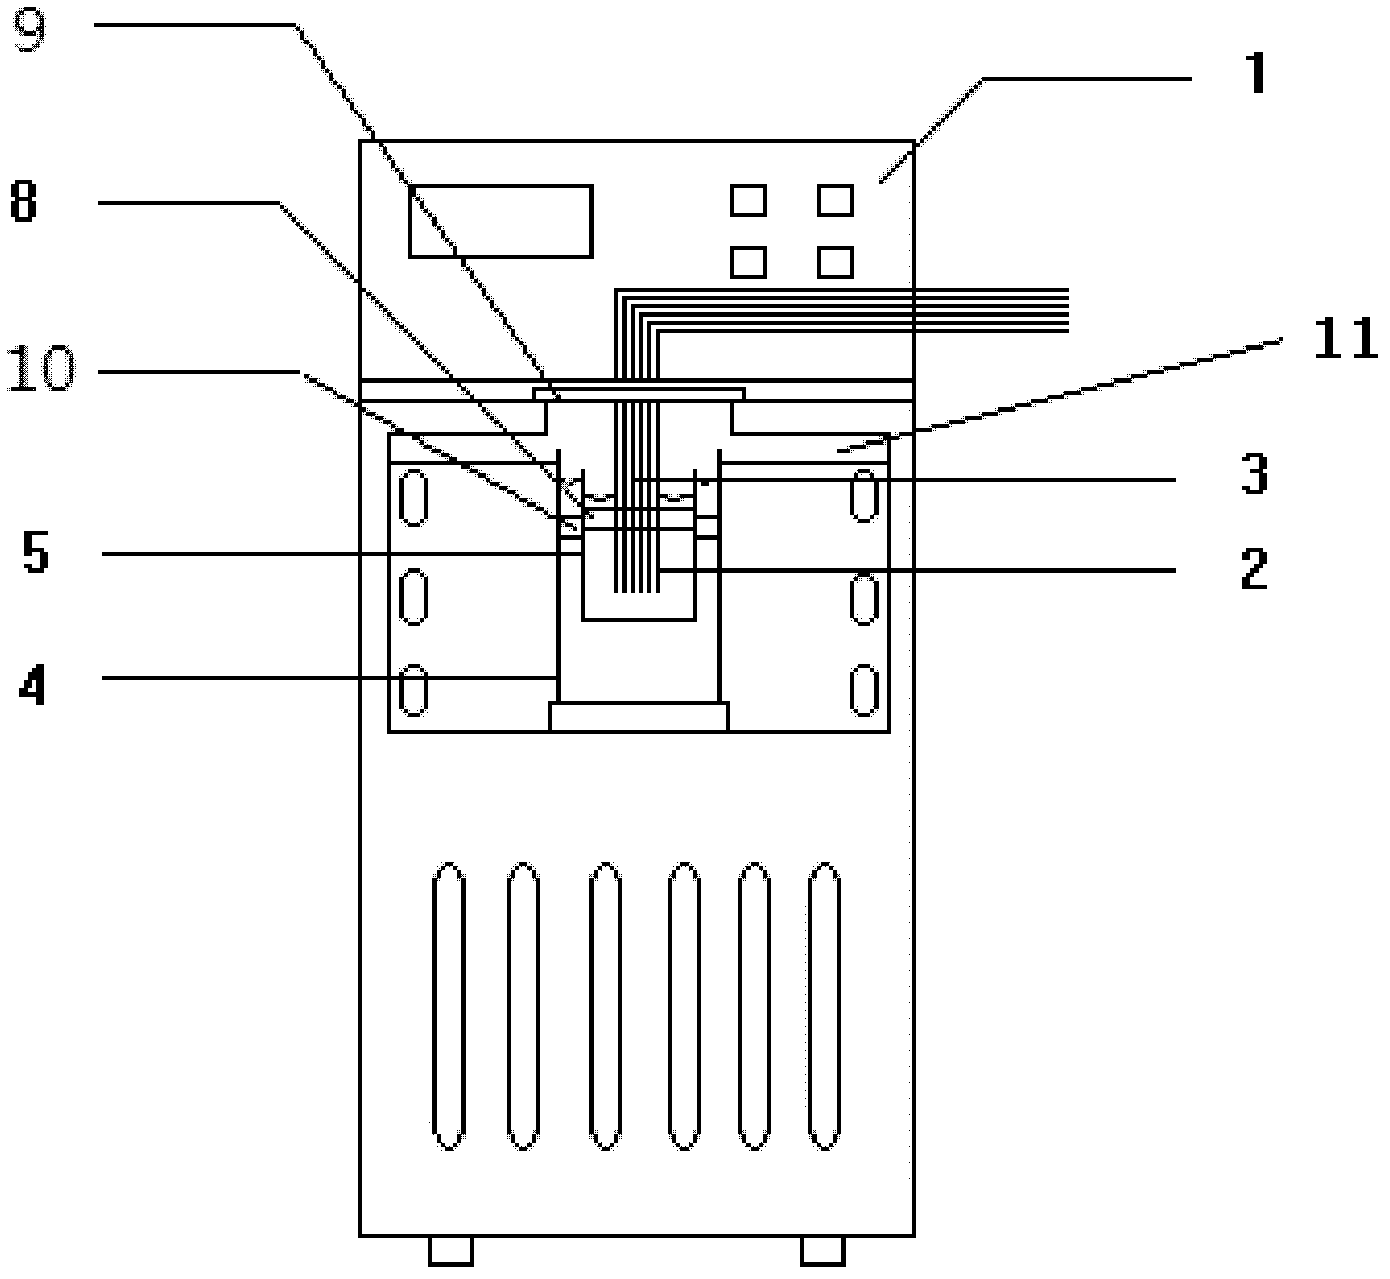 Multi-point temperature calibration device for accurately controlling temperature fluctuation of thermostatic water bath box and operation method thereof